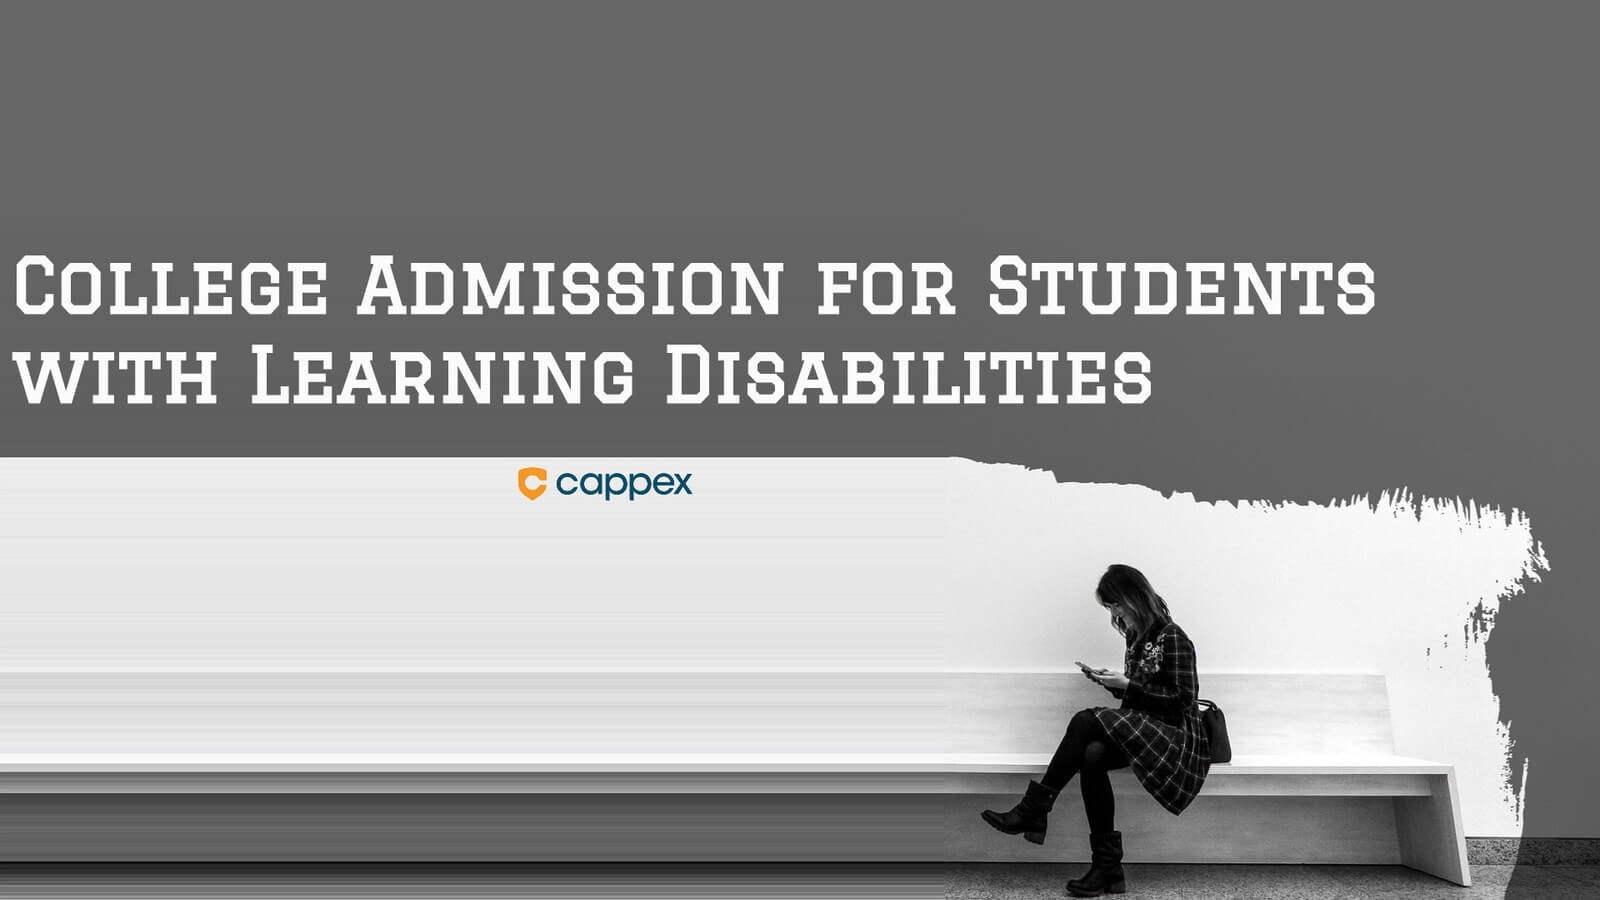 College Admission for Students with Learning Disabilities